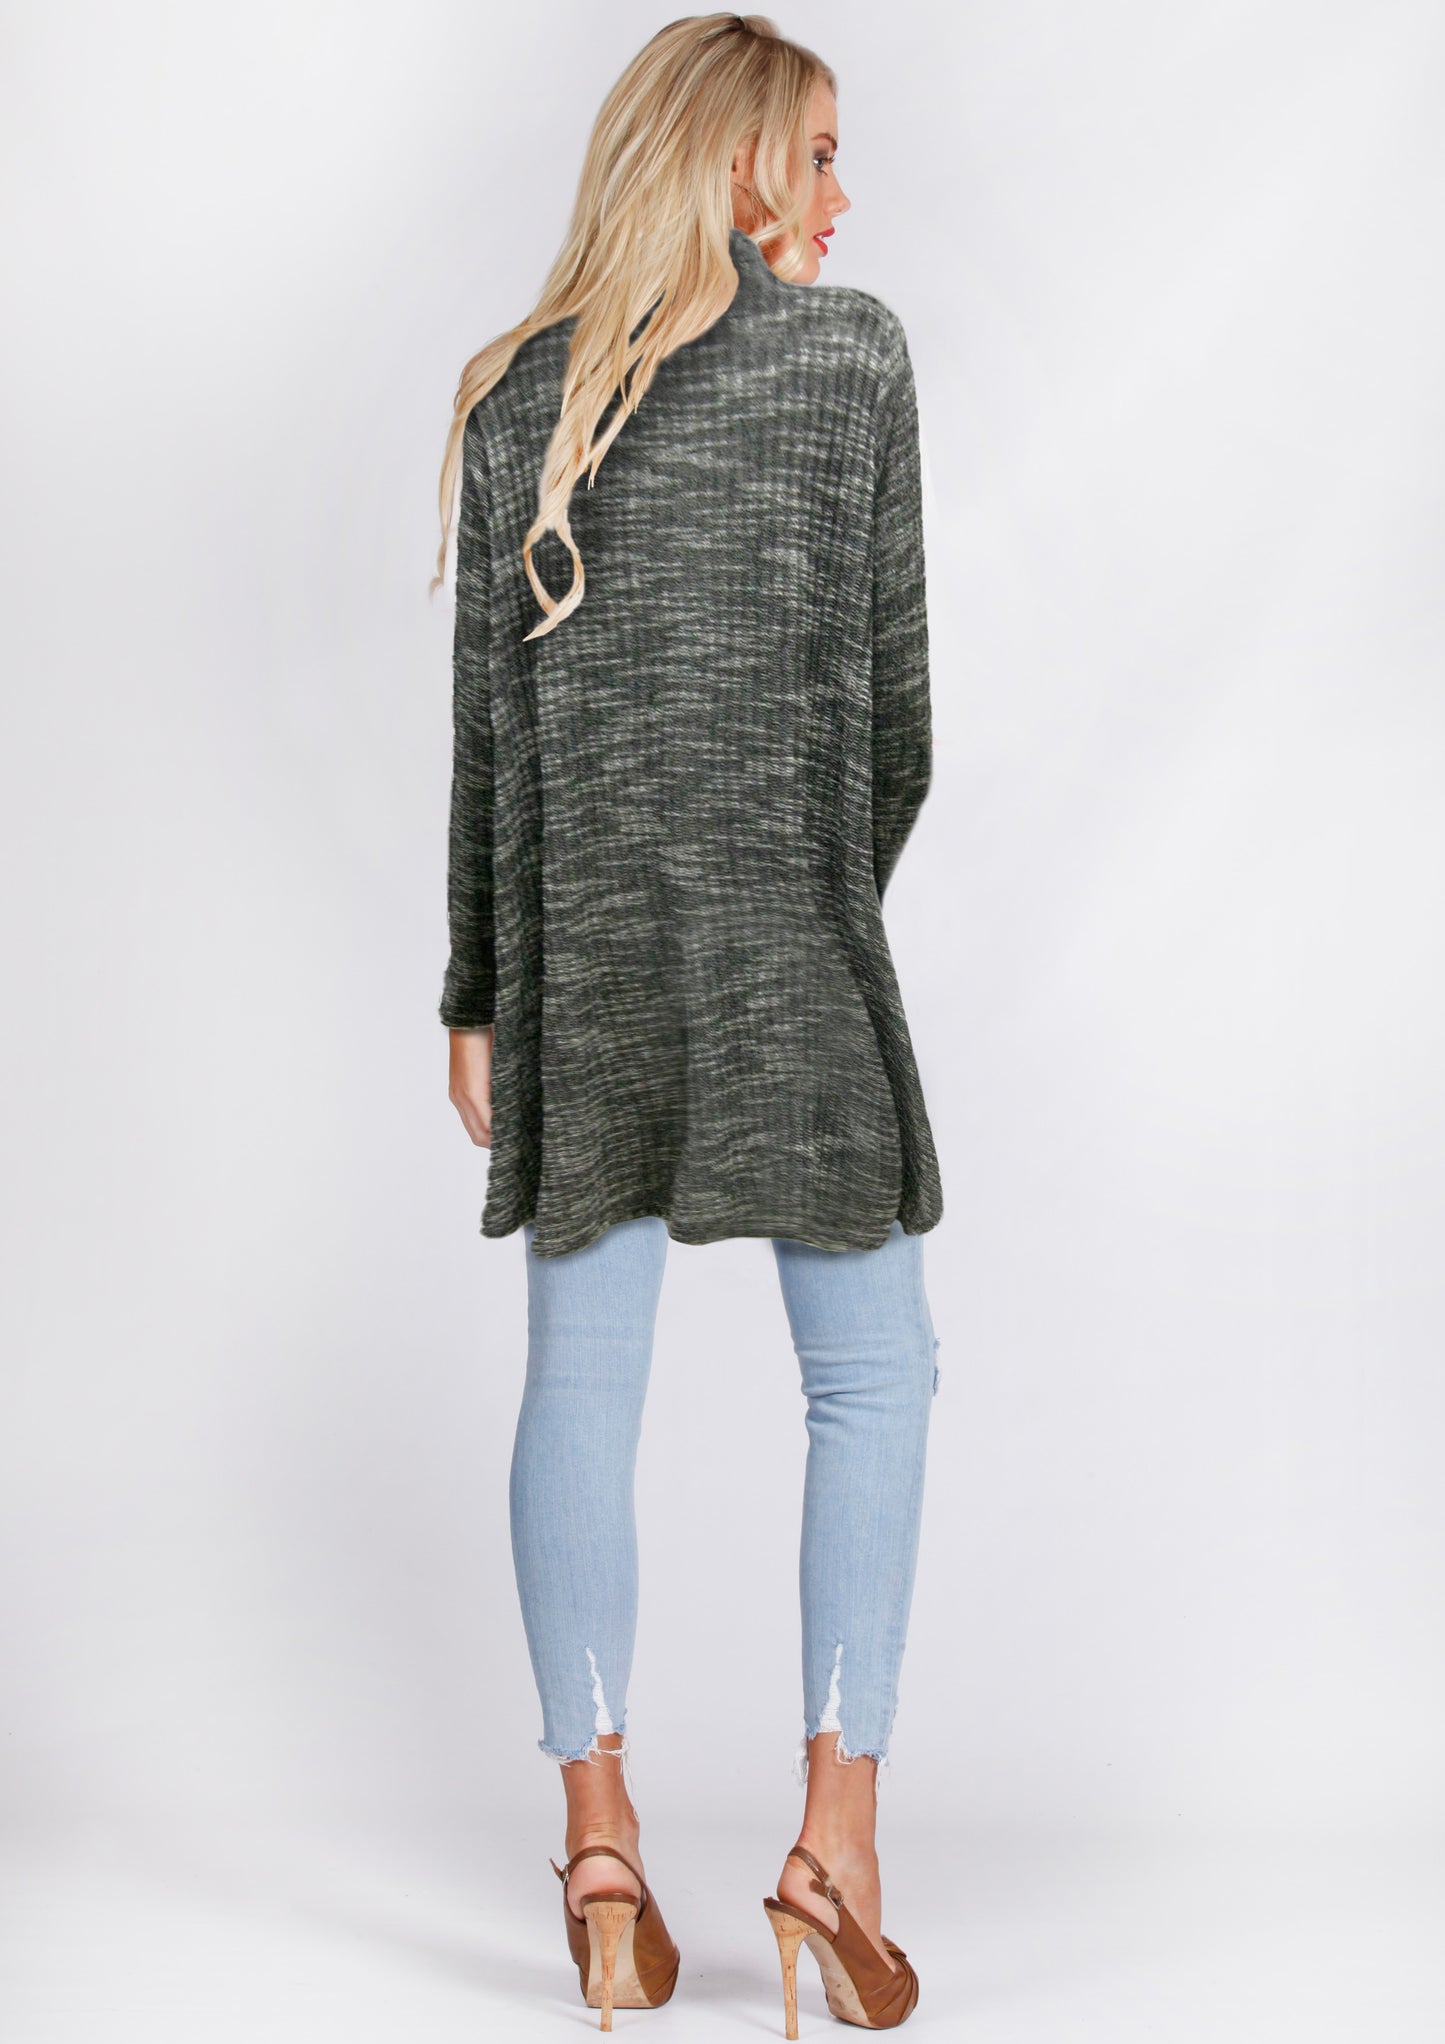 A067NC High Low Cut Cardigan (Pack) on sales $5